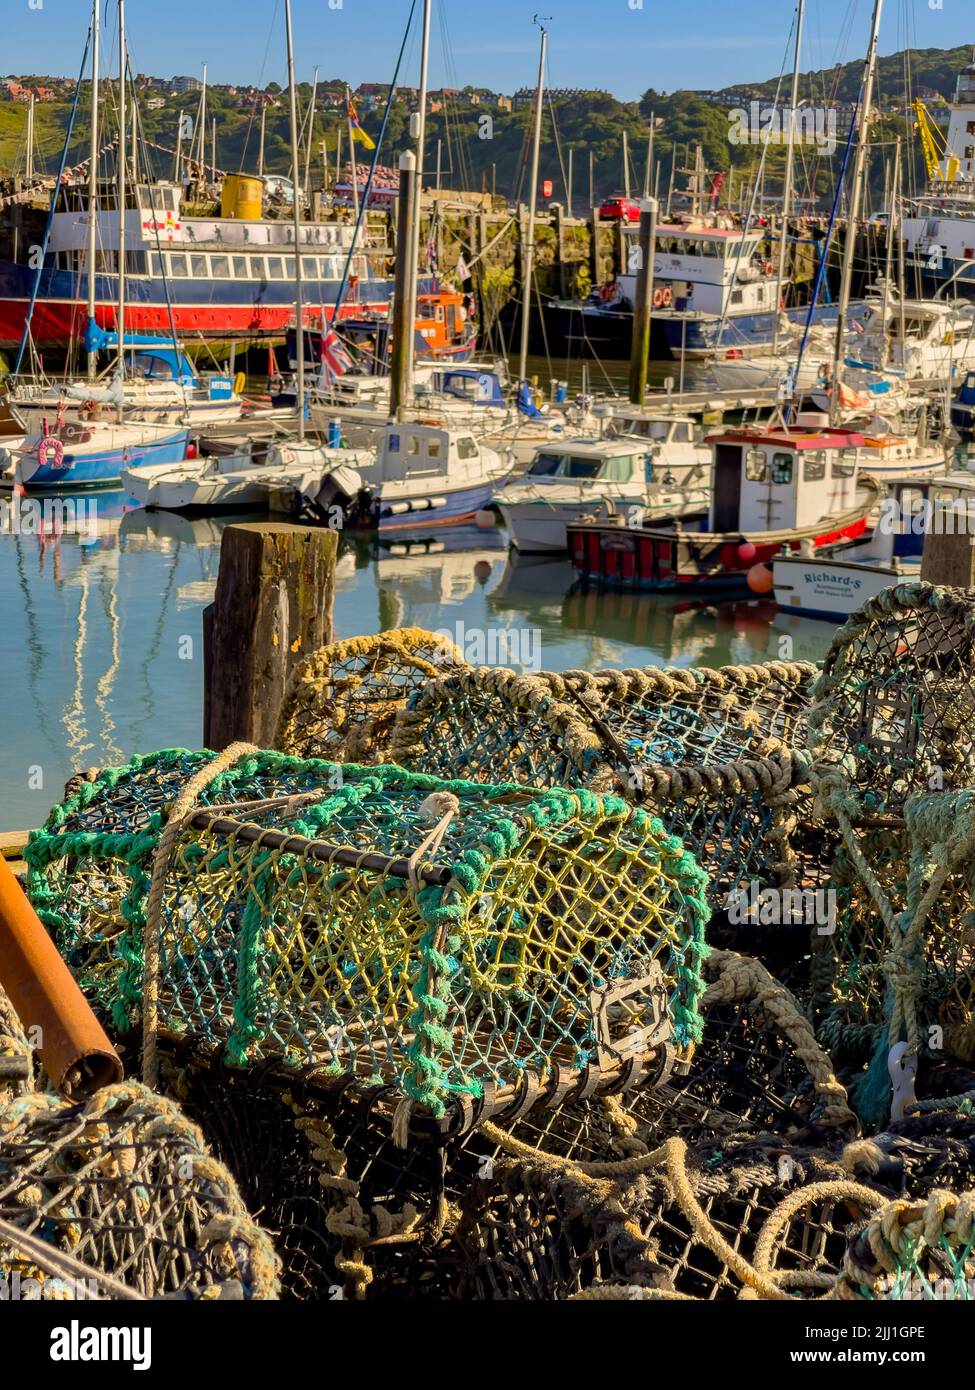 Lobster pots and boats in South Bay Harbour, Scarborough, UK Stock Photo